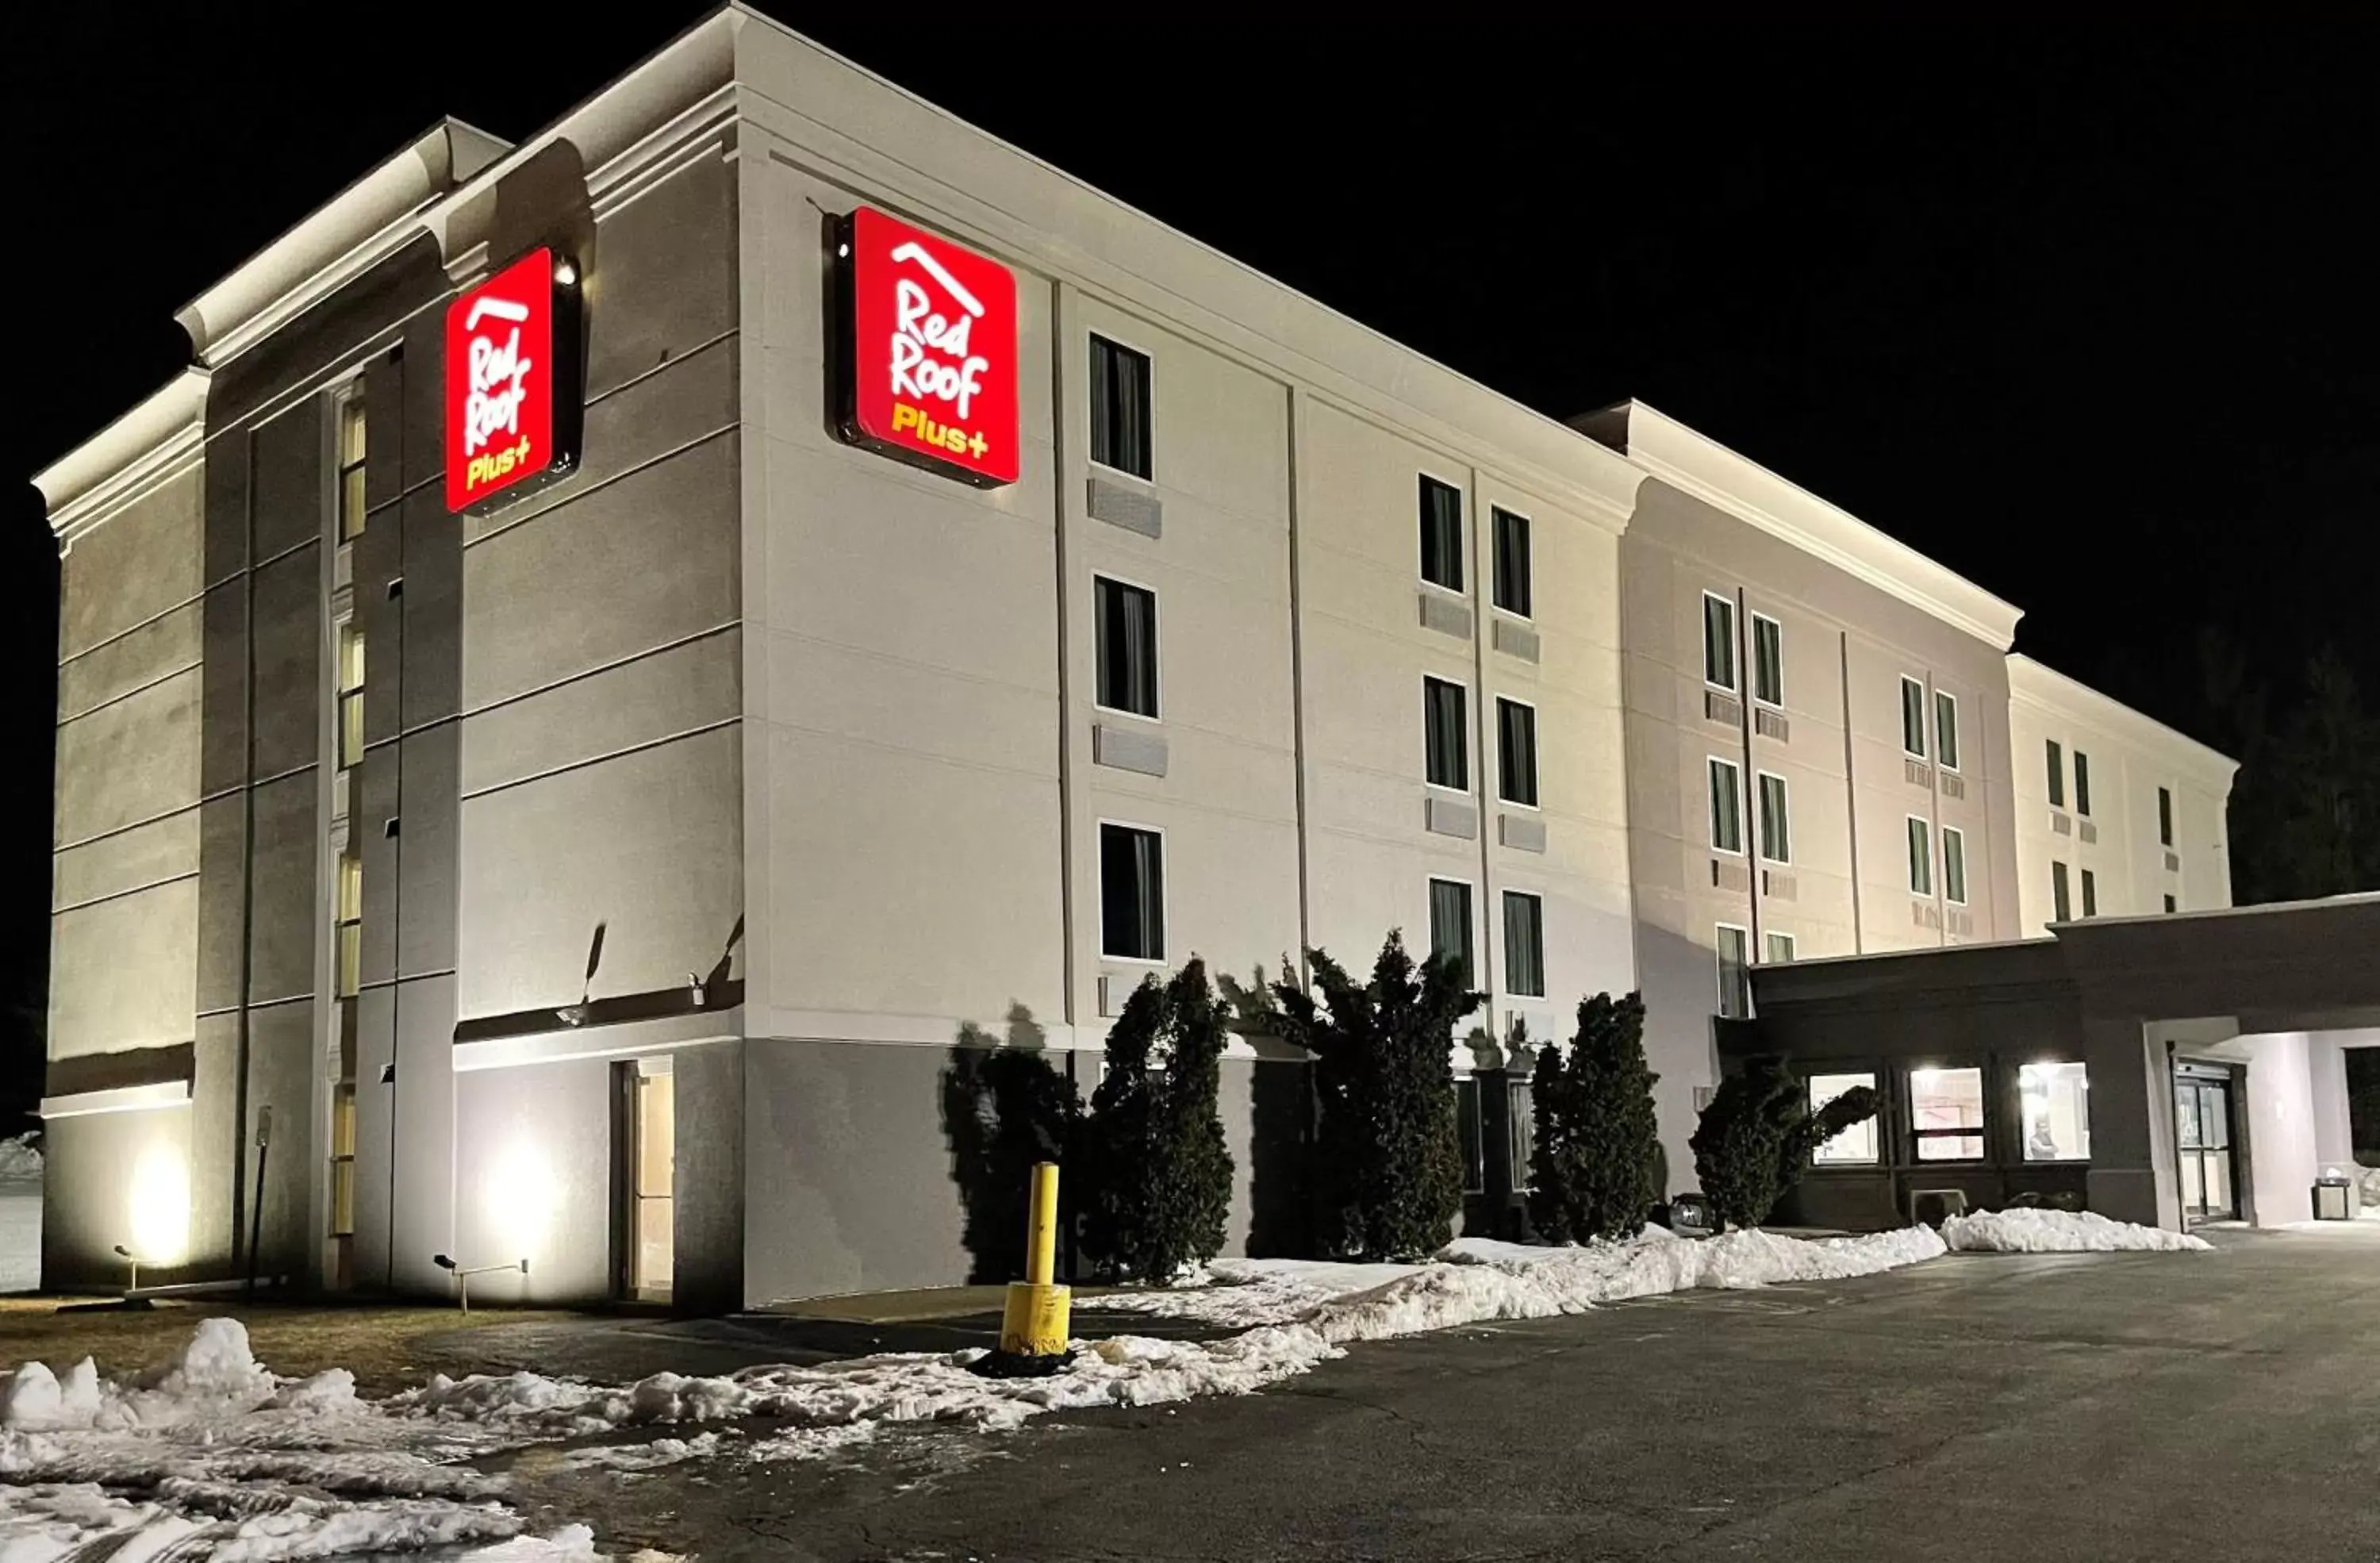 Property Building in Red Roof Inn PLUS Easton